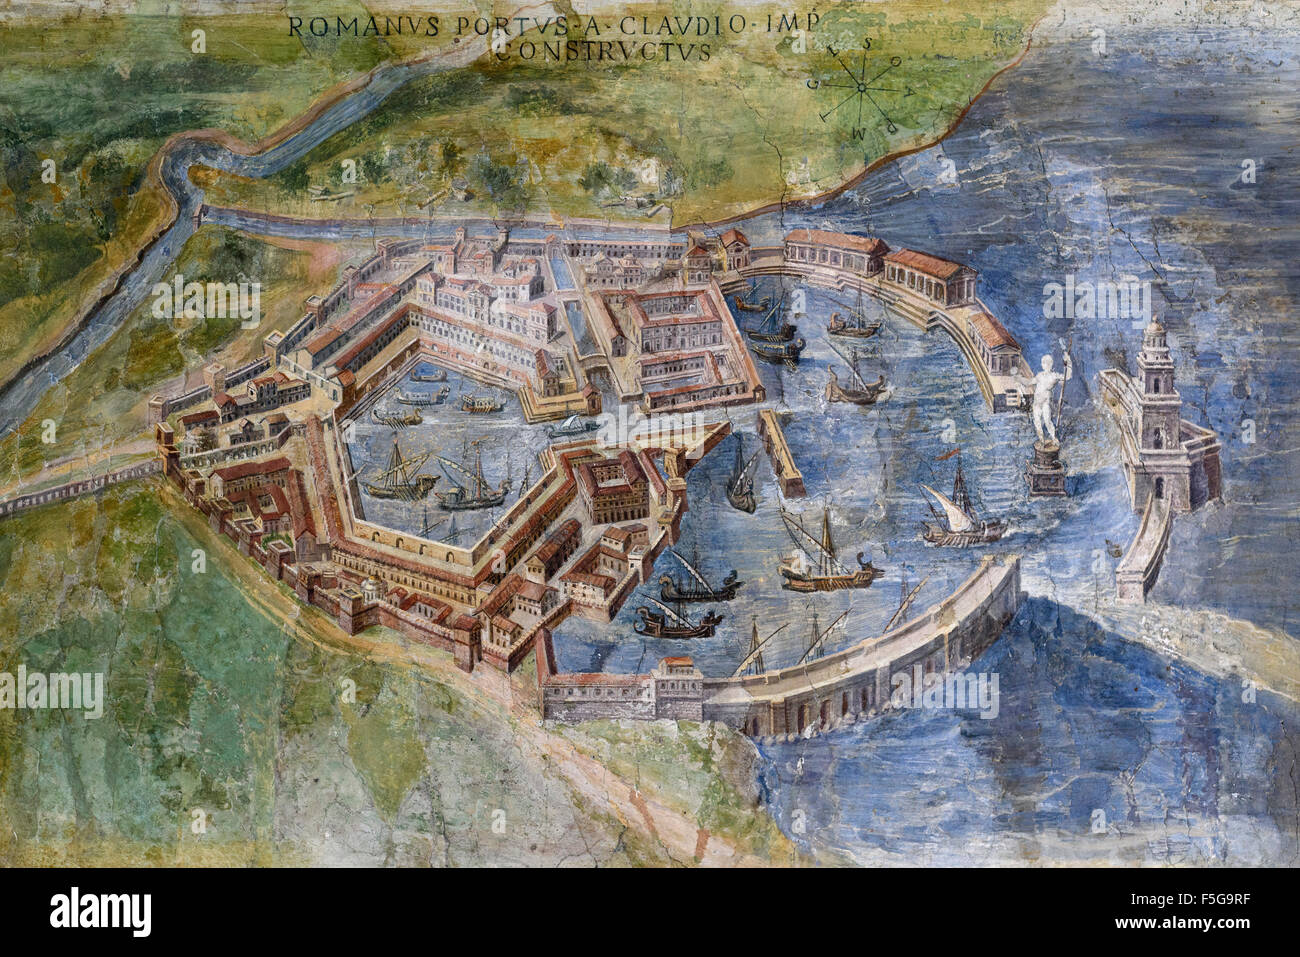 Psychologisch Ontdooien, ontdooien, vorst ontdooien Agrarisch Rome. Italy. Painting of the Portus, an artificial harbour established by  Claudius, near the port of Ostia. The Gallery of Maps Stock Photo - Alamy